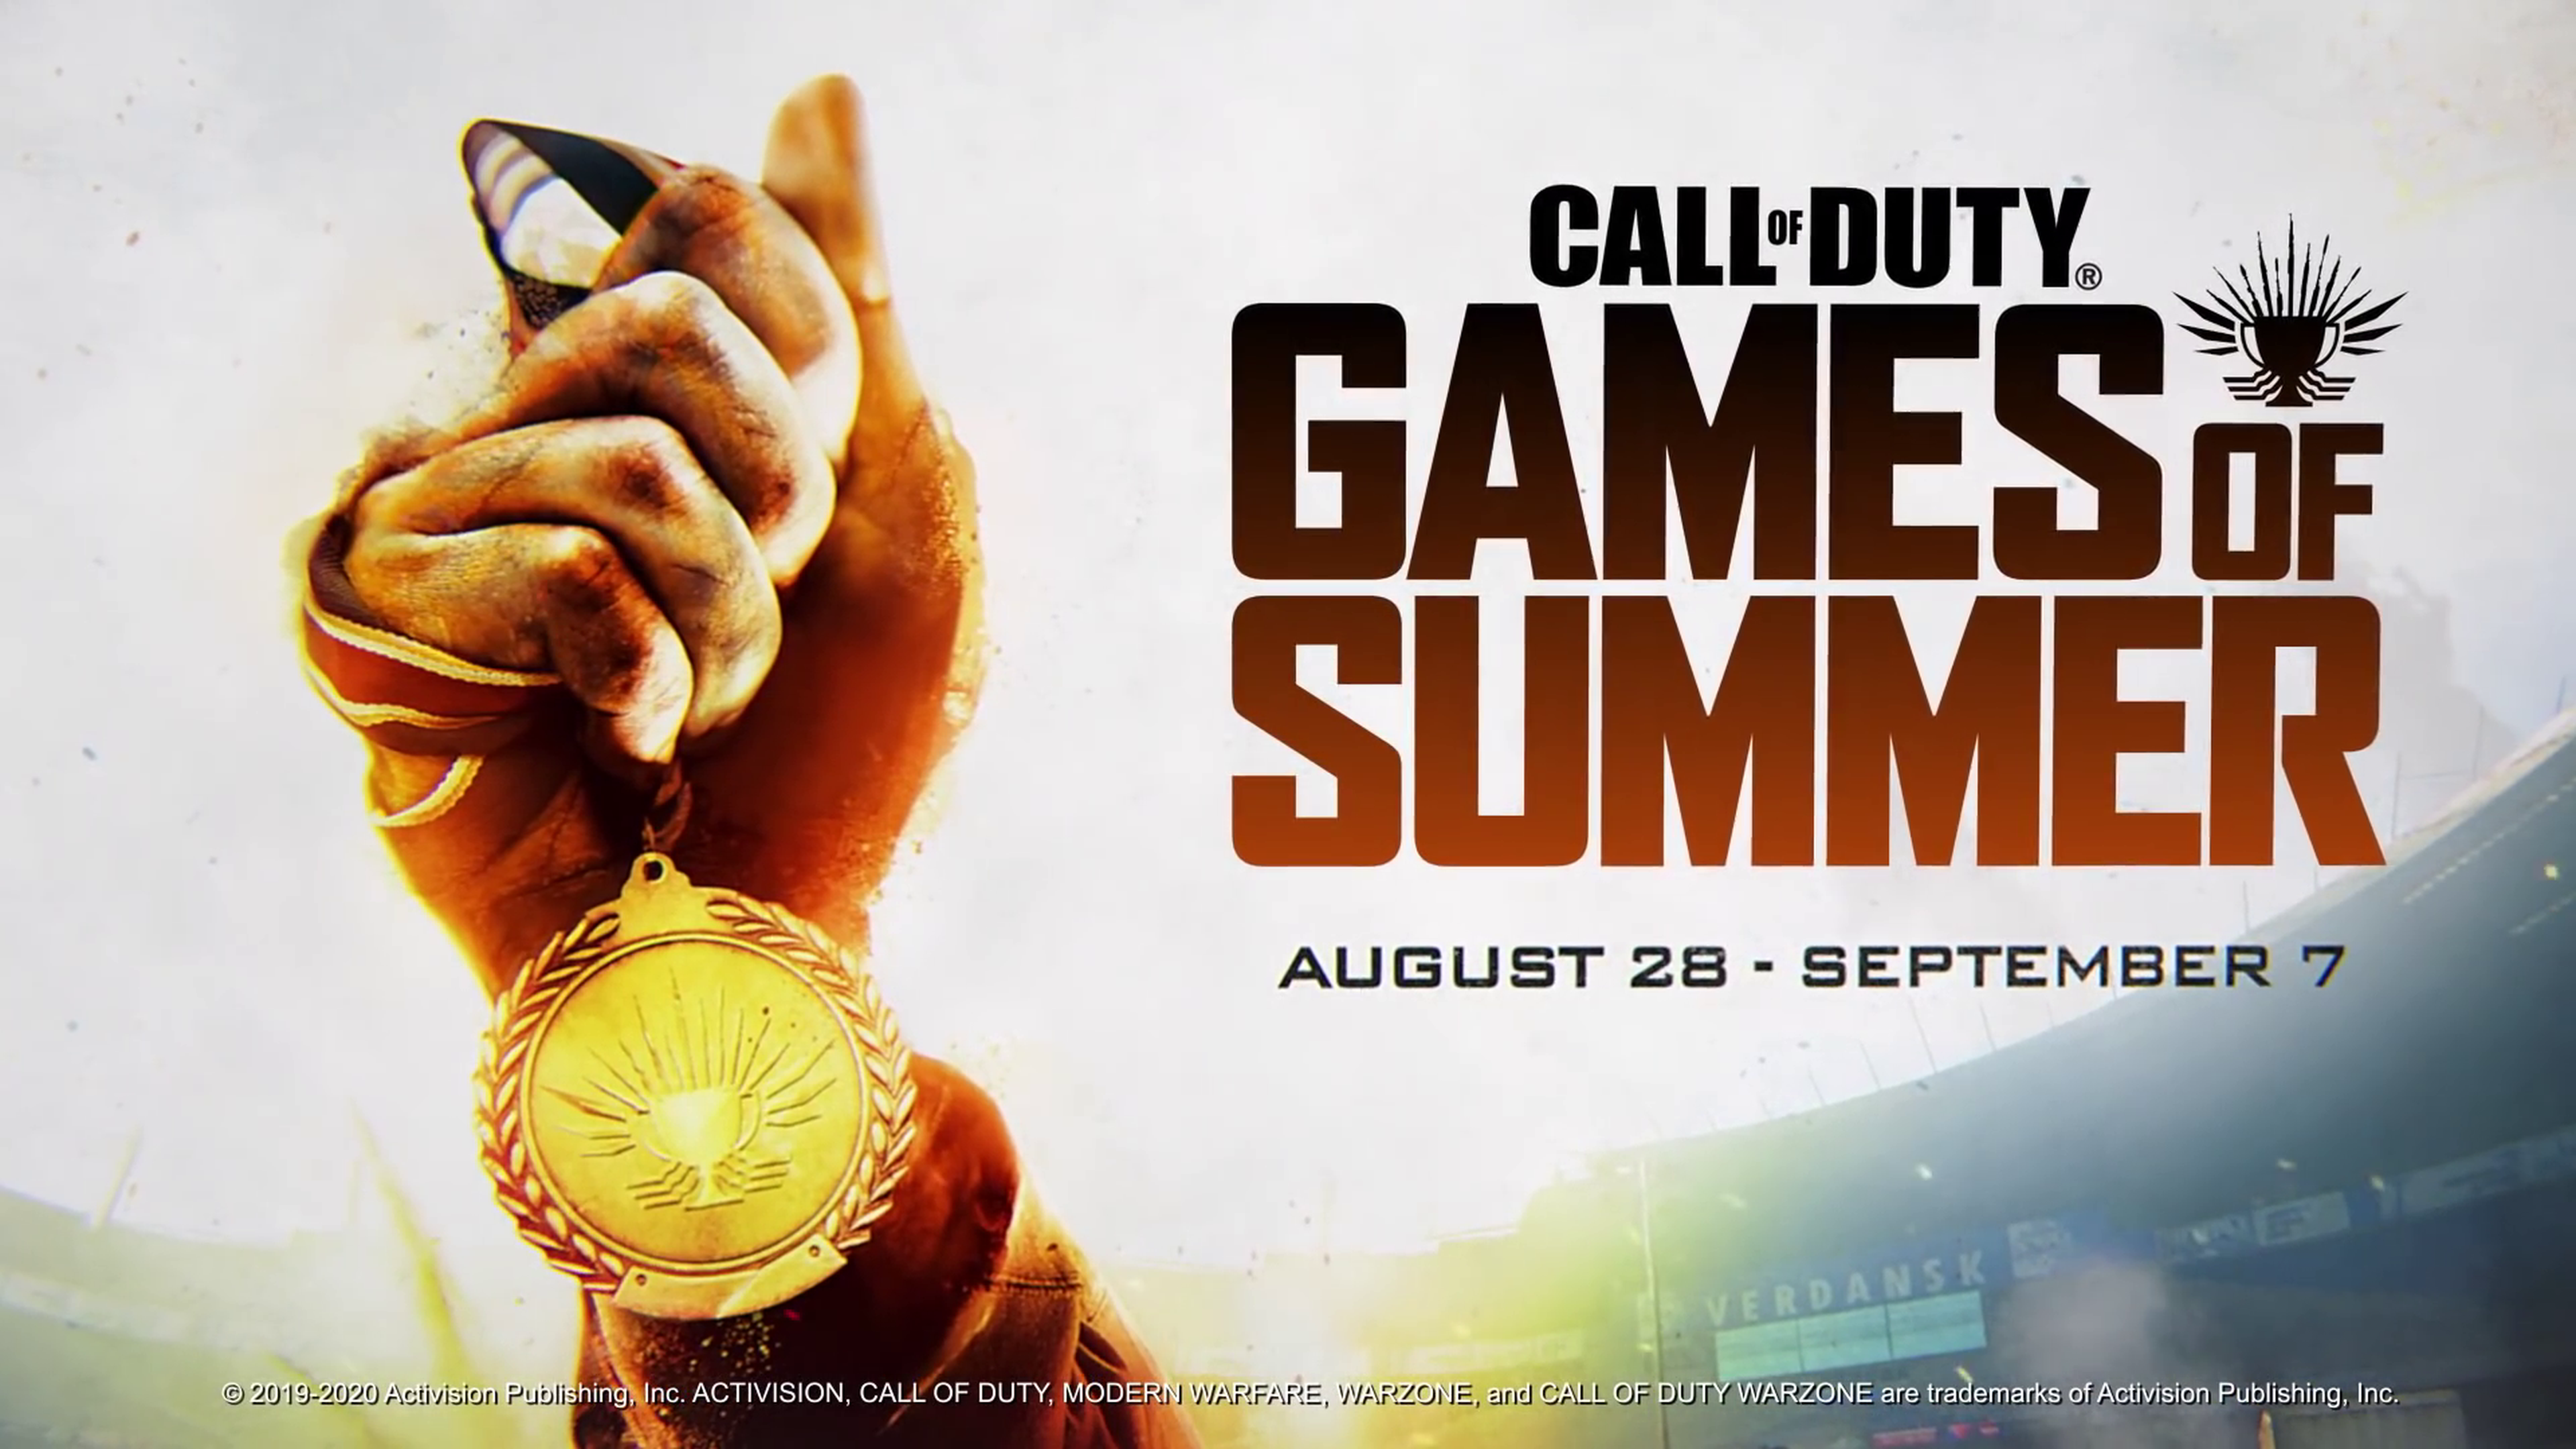 Call of Duty - Games of Summer